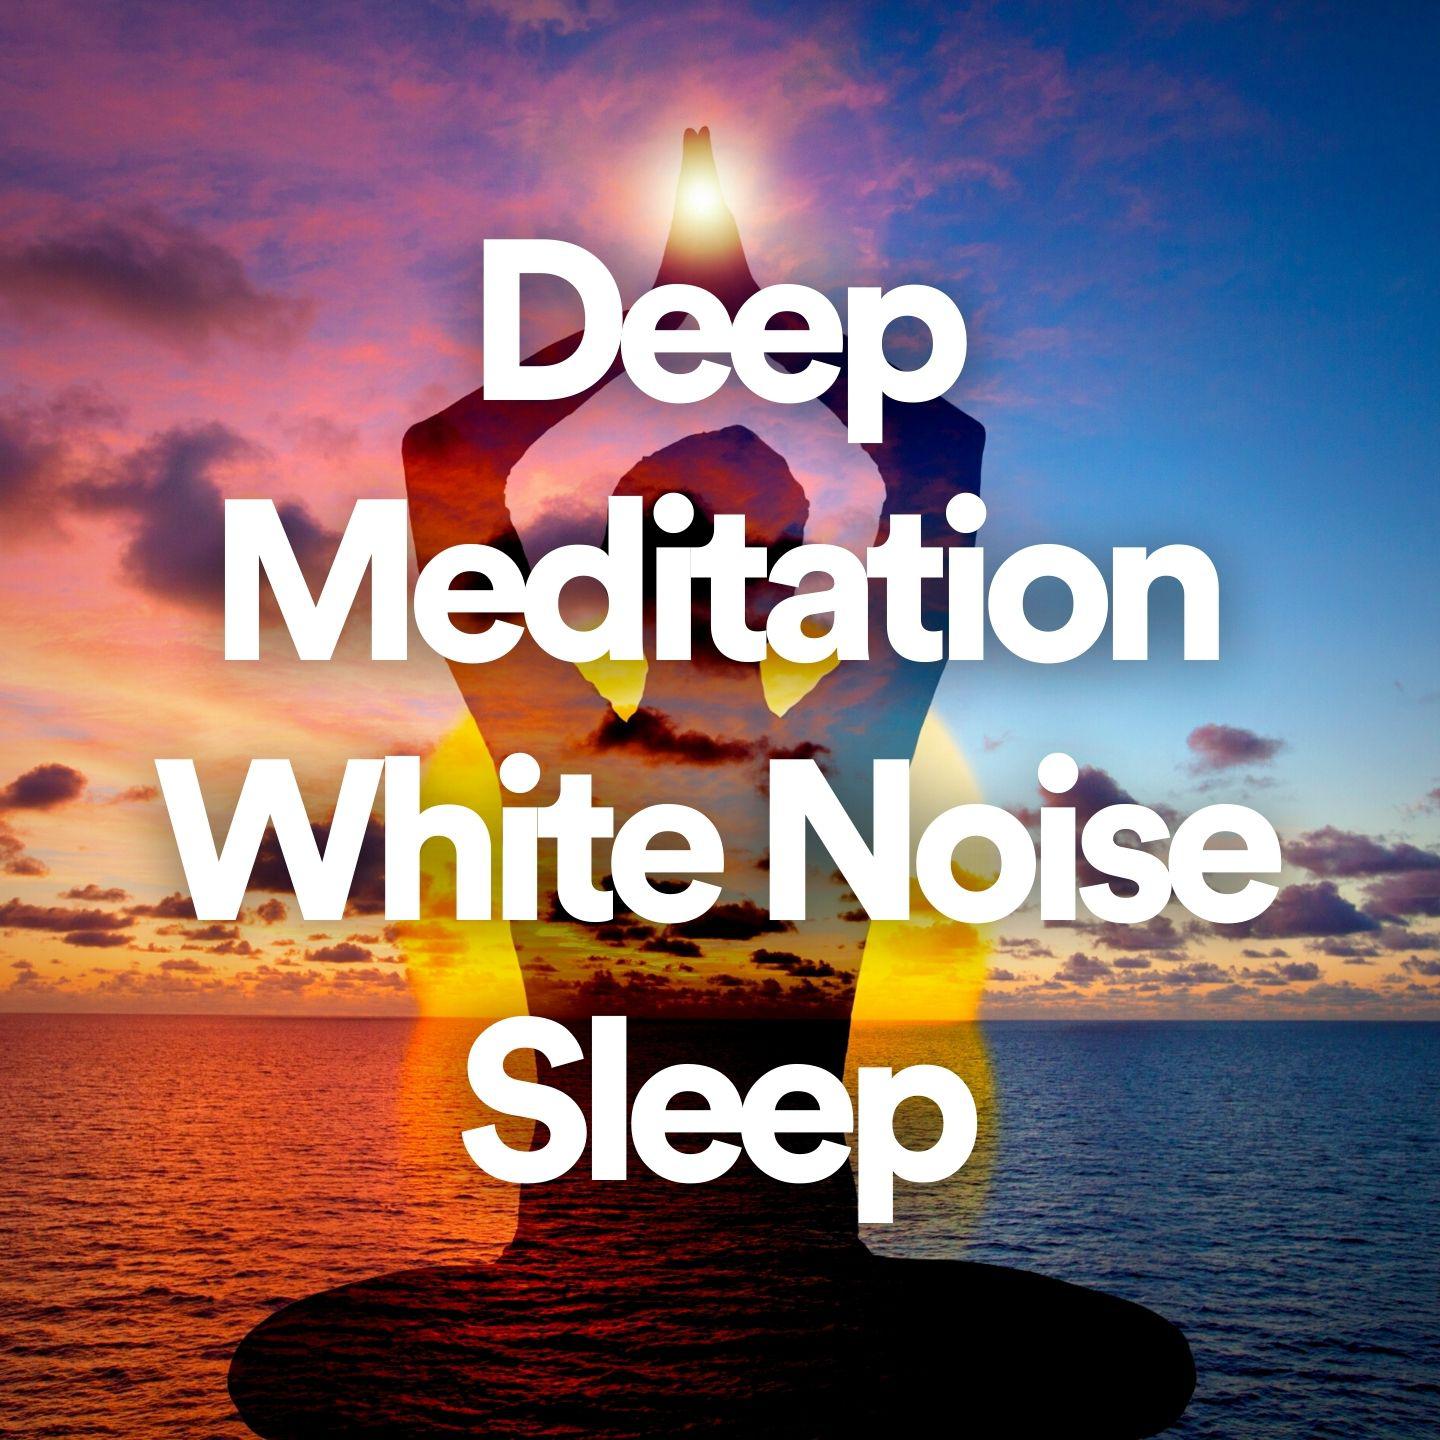 Zen Meditation and Natural White Noise and New Age Deep Massage - Spaces